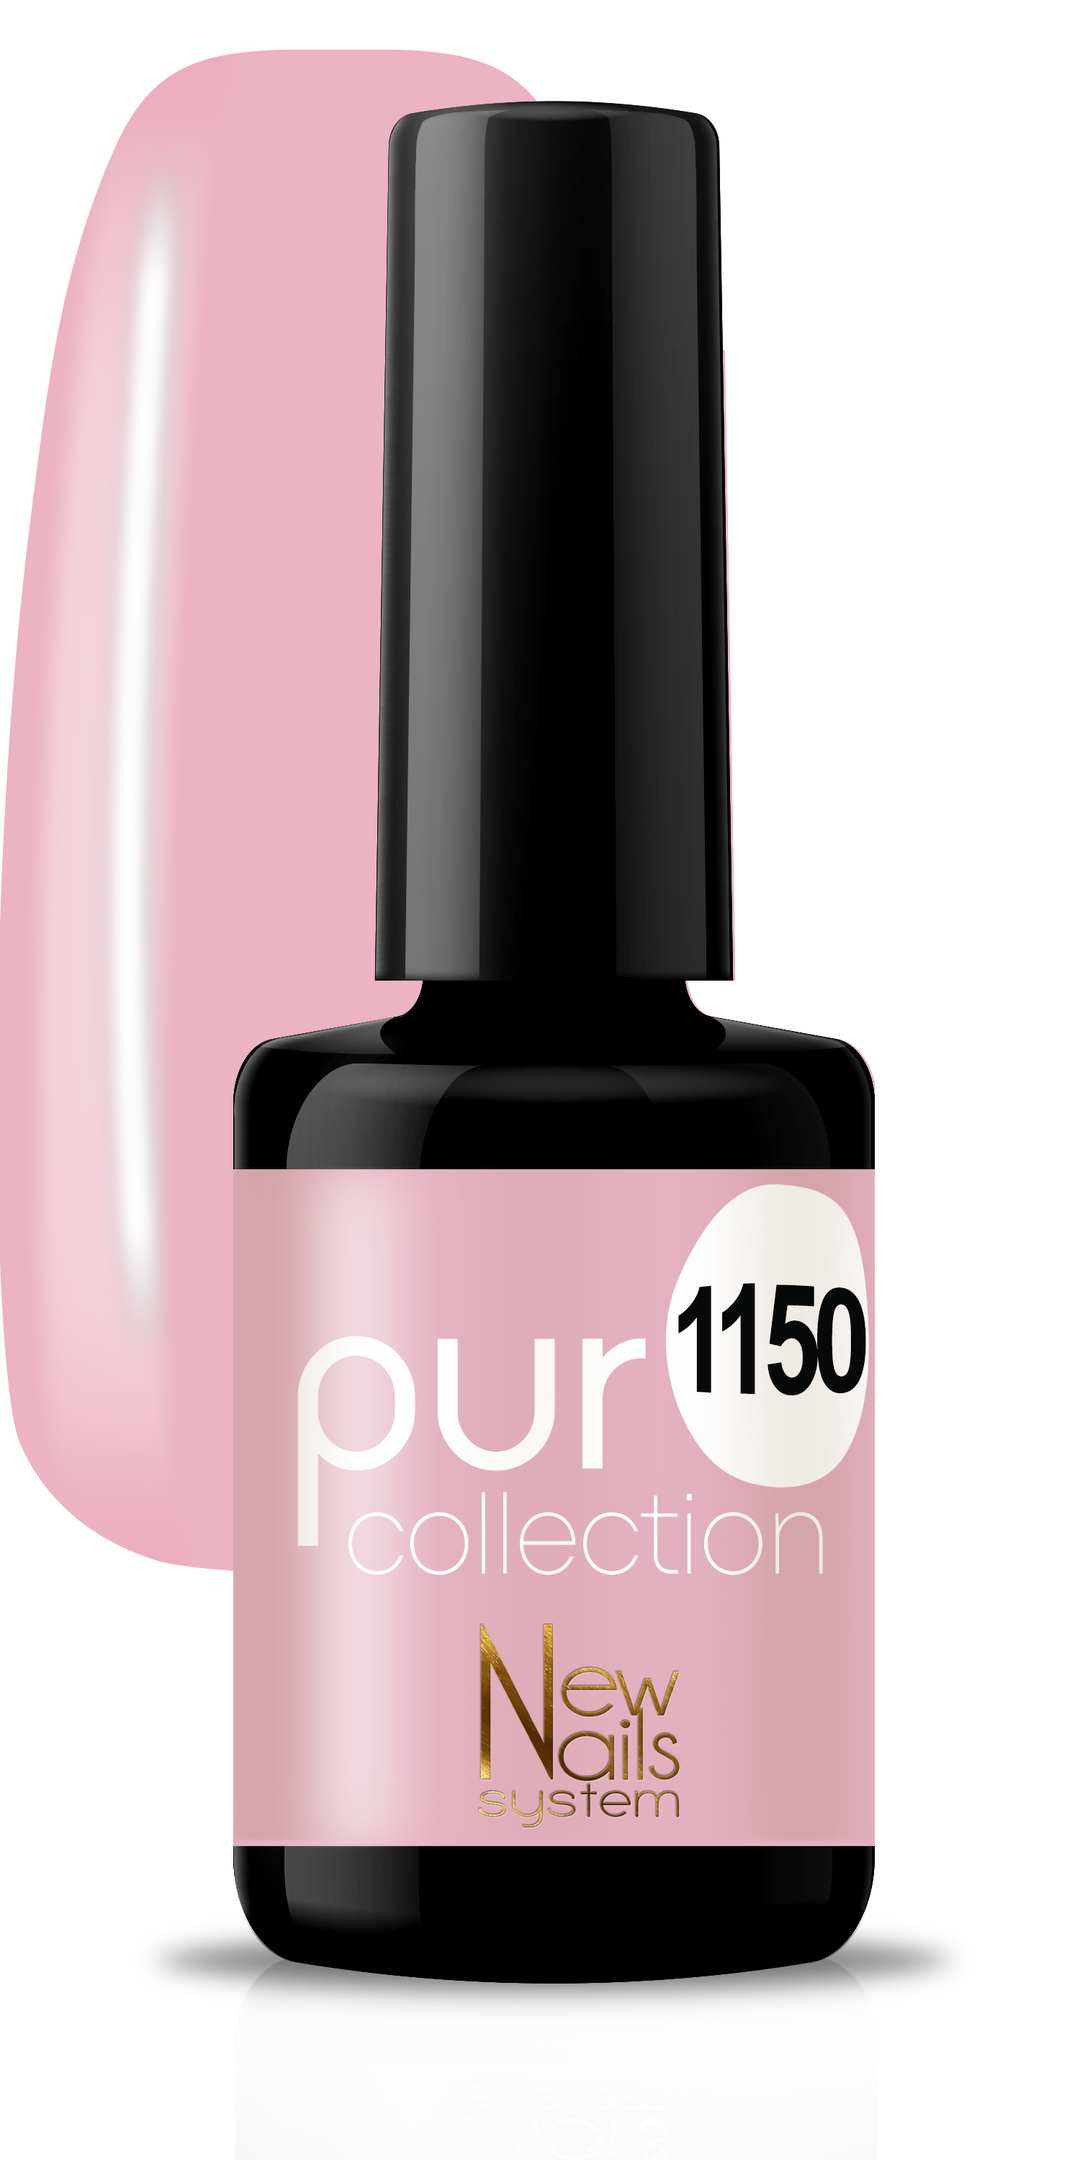 Puro collection Scent of Roses 1150 polish gel color 5ml